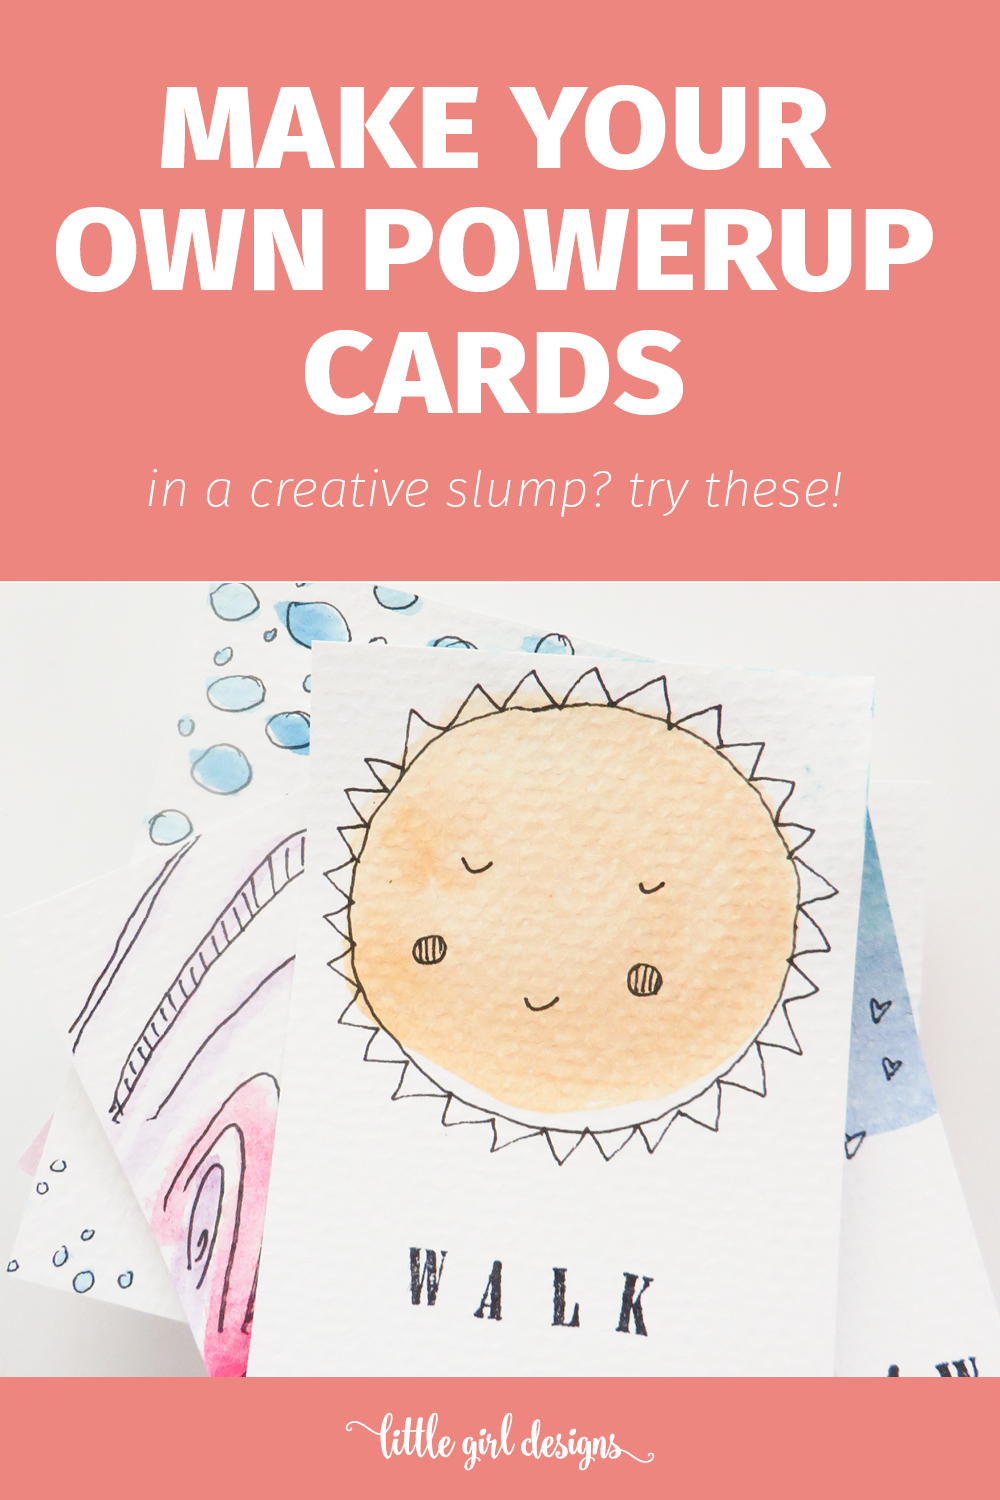 I need these in my life! This is a simple tutorial on how to make artist powerup cards—you know, just like the powerups you get when you play video games! These cards will help you get out of the creative doldrums and can be personalized to no end. Where have these been all my life?! :)